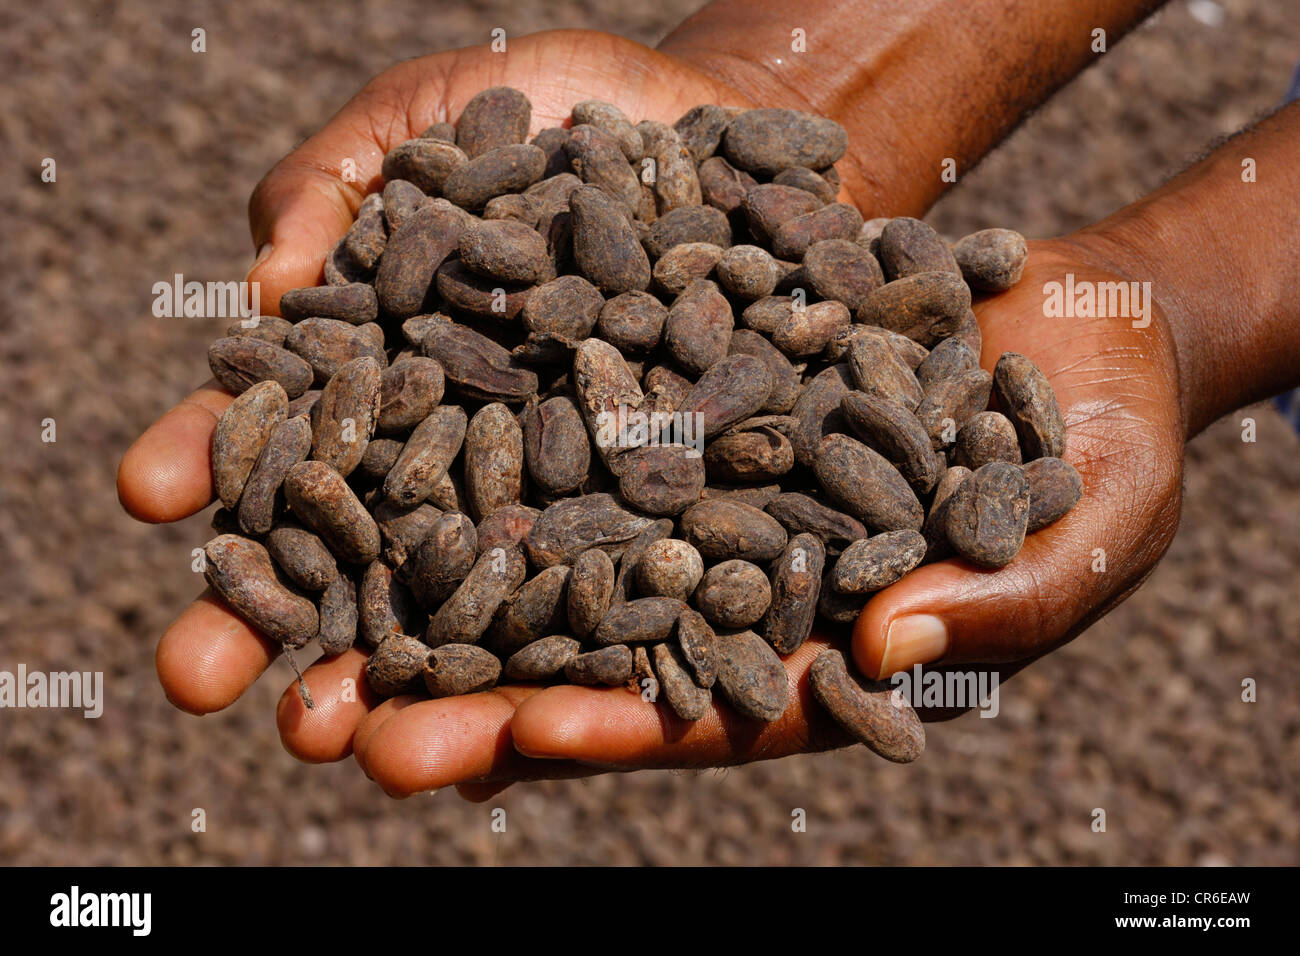 Hands holding cacao beans, Bamenda, Cameroon, Africa Stock Photo